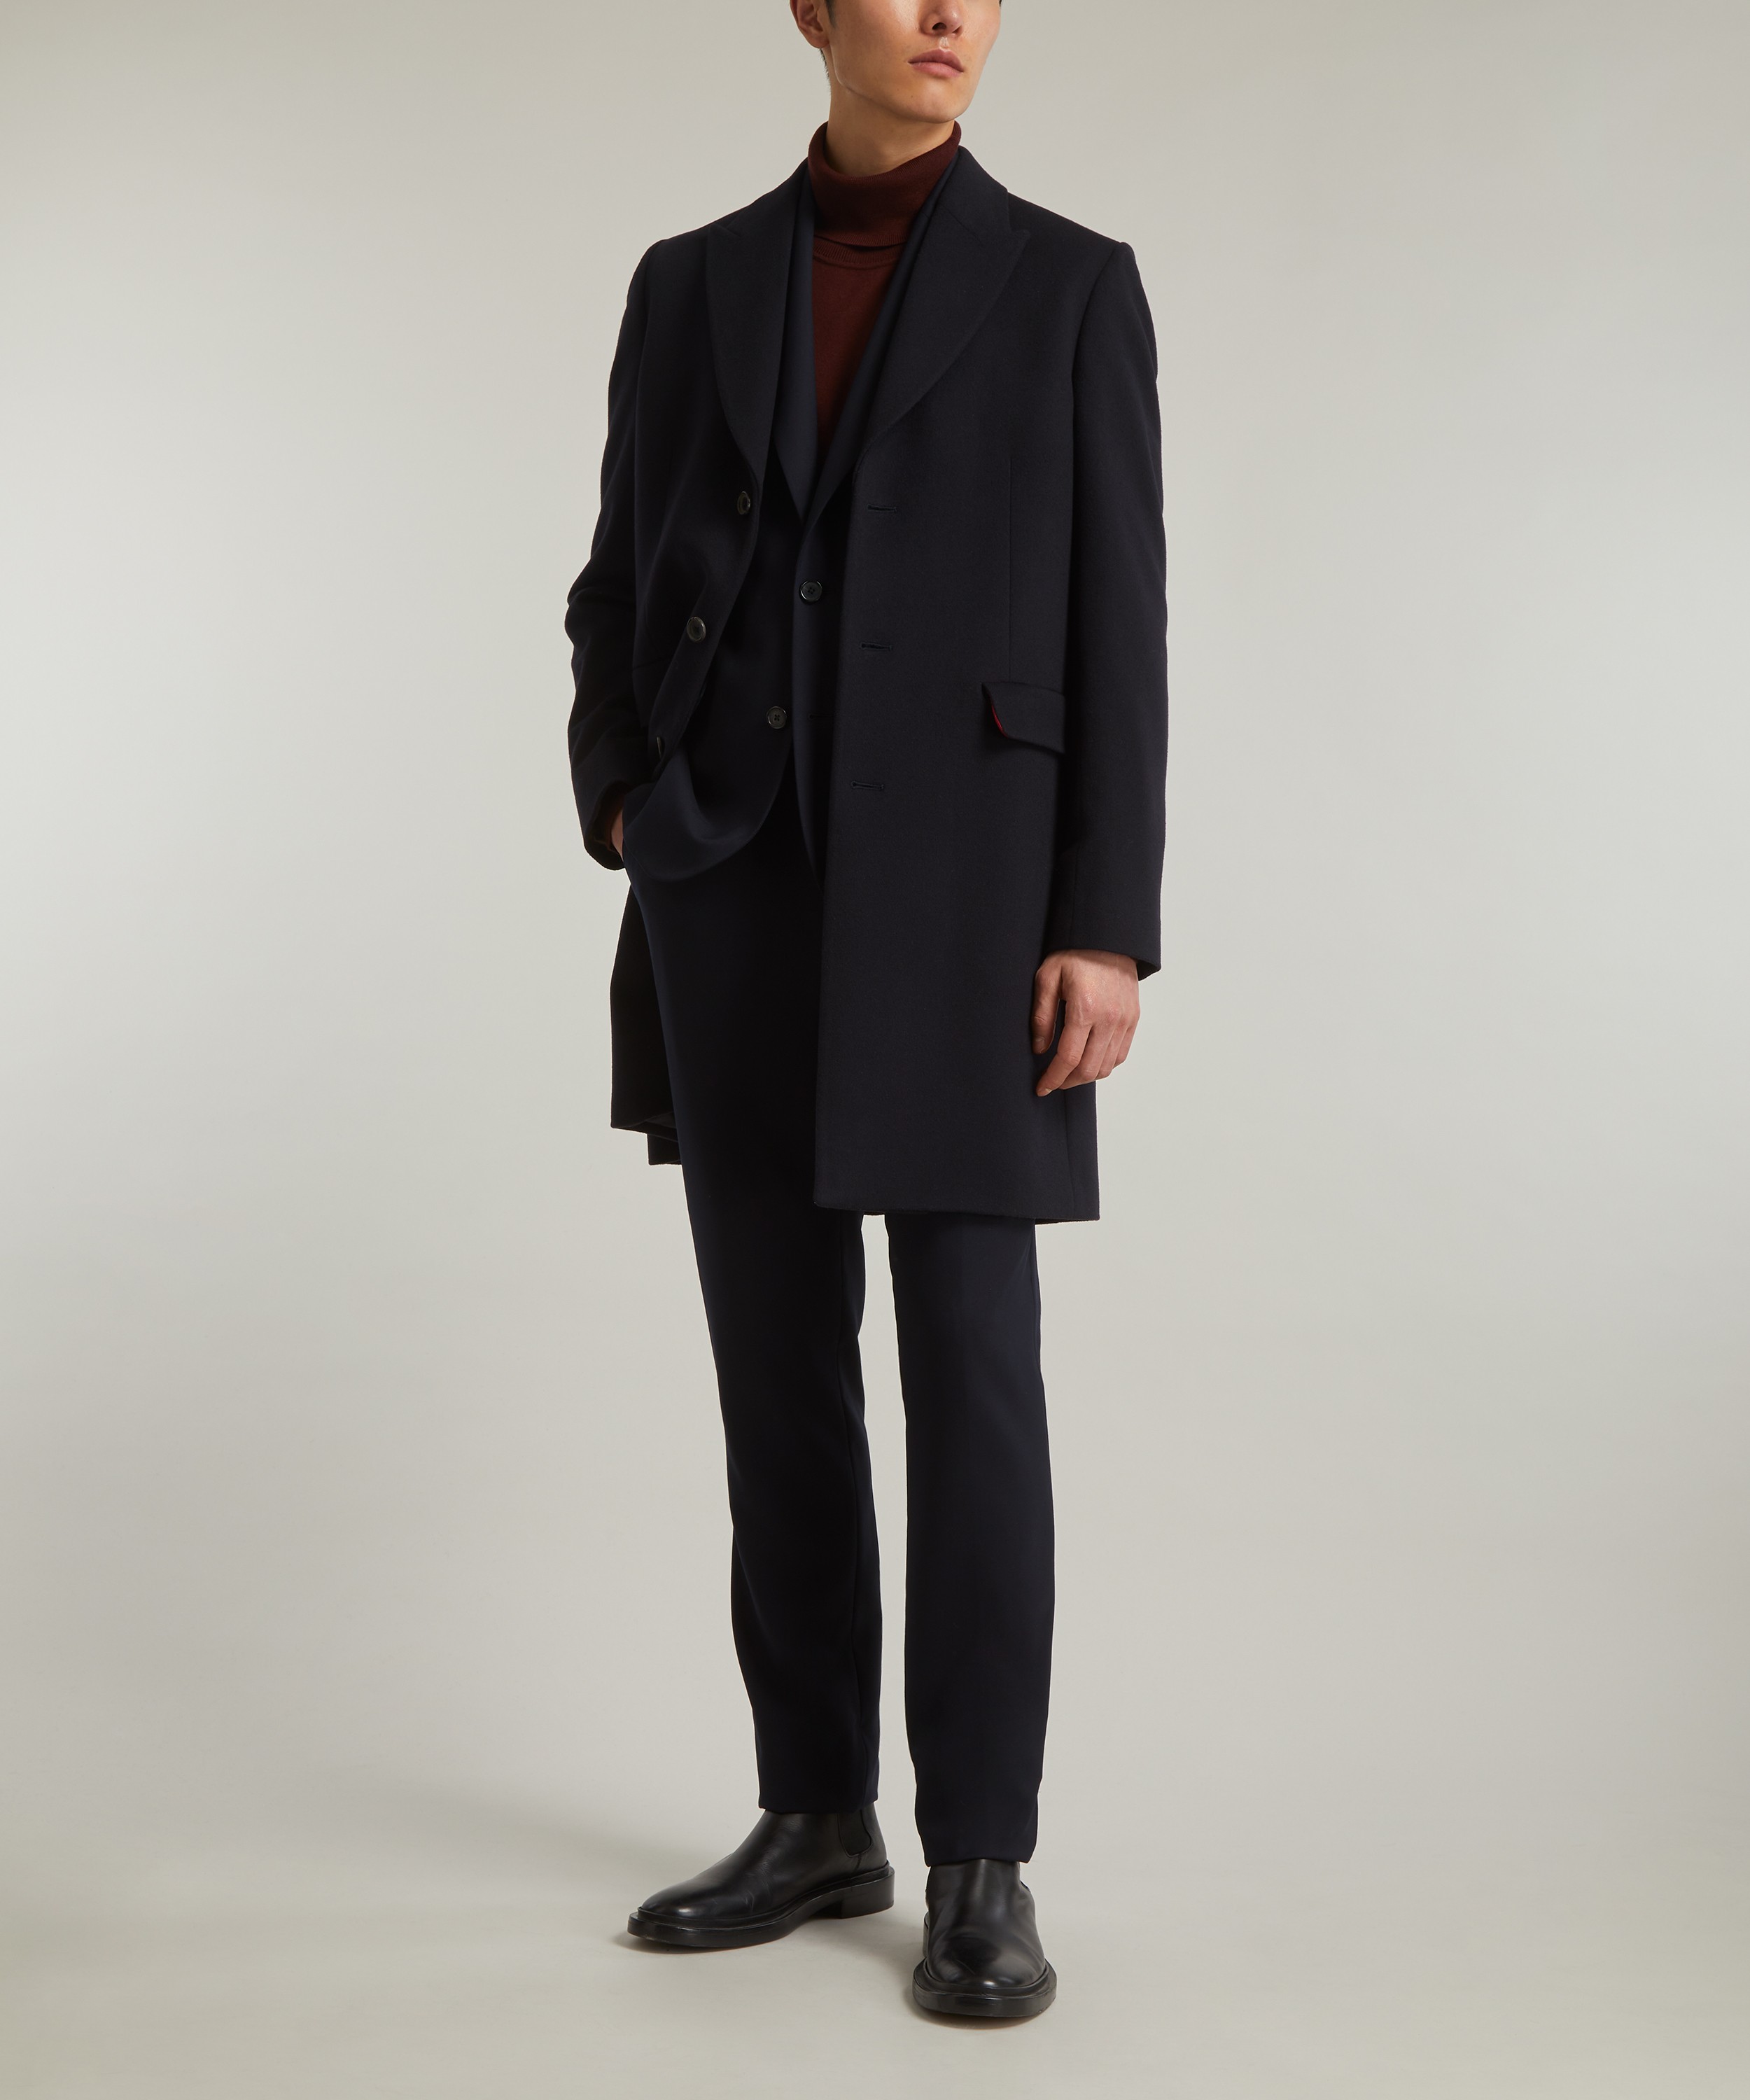 Paul Smith Single-Breasted Wool-Cashmere Blend Coat | Liberty